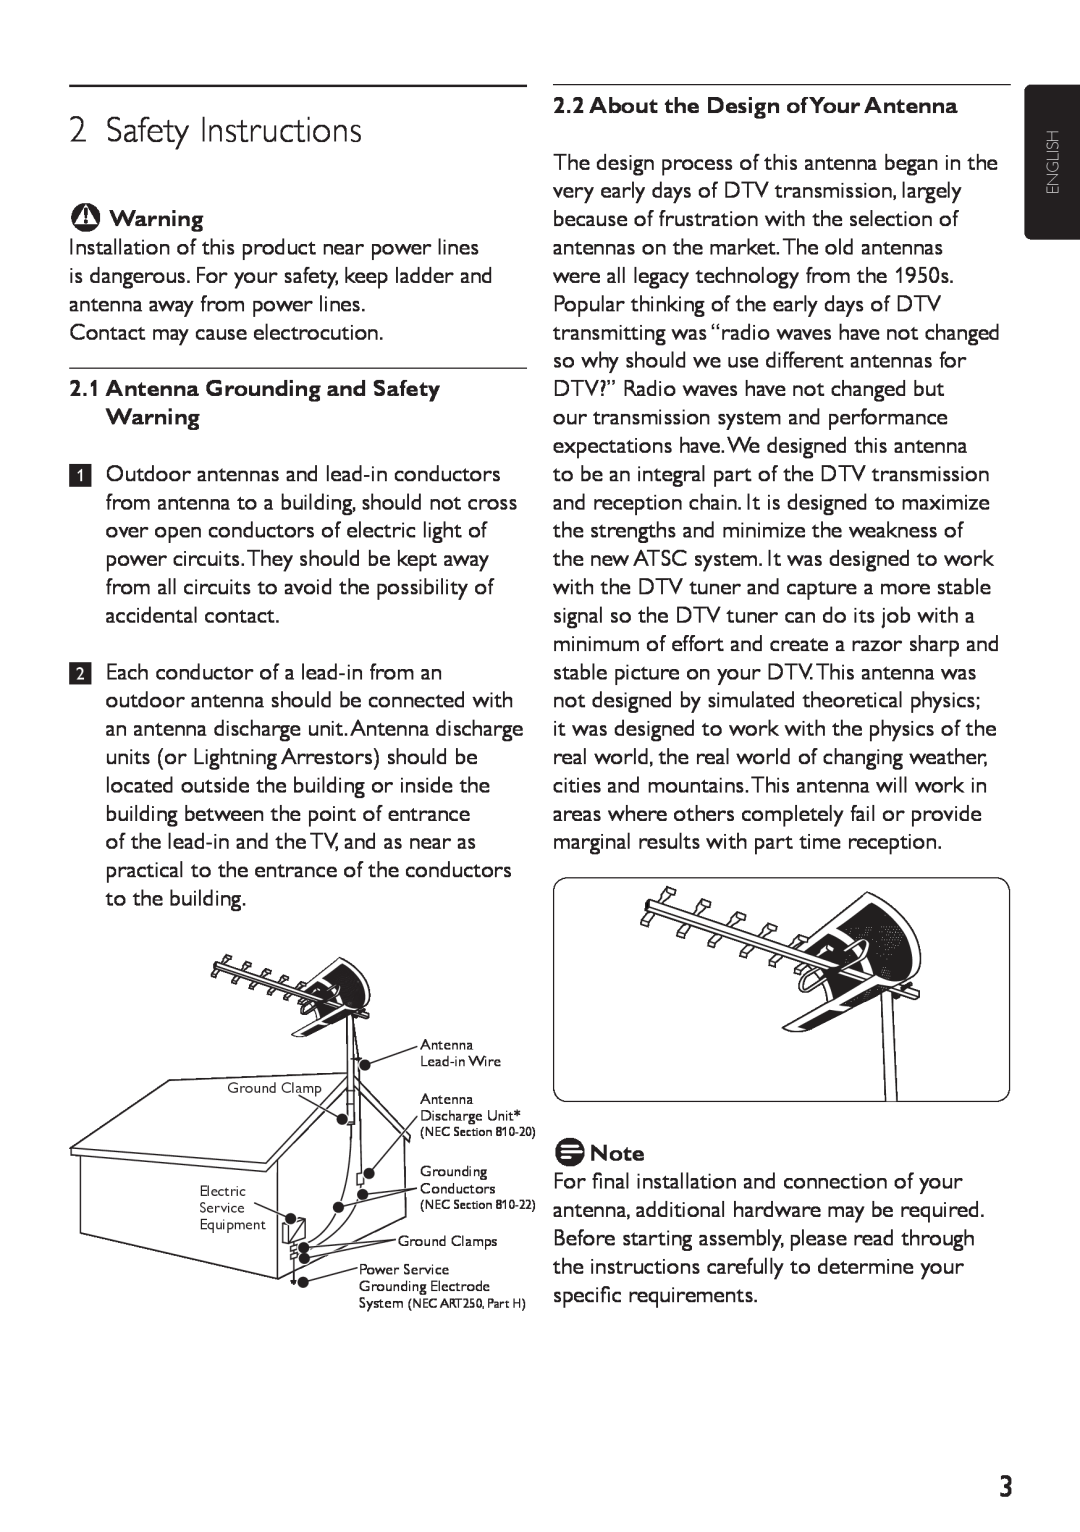 Philips SDV4310/27 Safety Instructions, BWarning, 2.1Antenna Grounding and Safety Warning, About the Design ofYour Antenna 